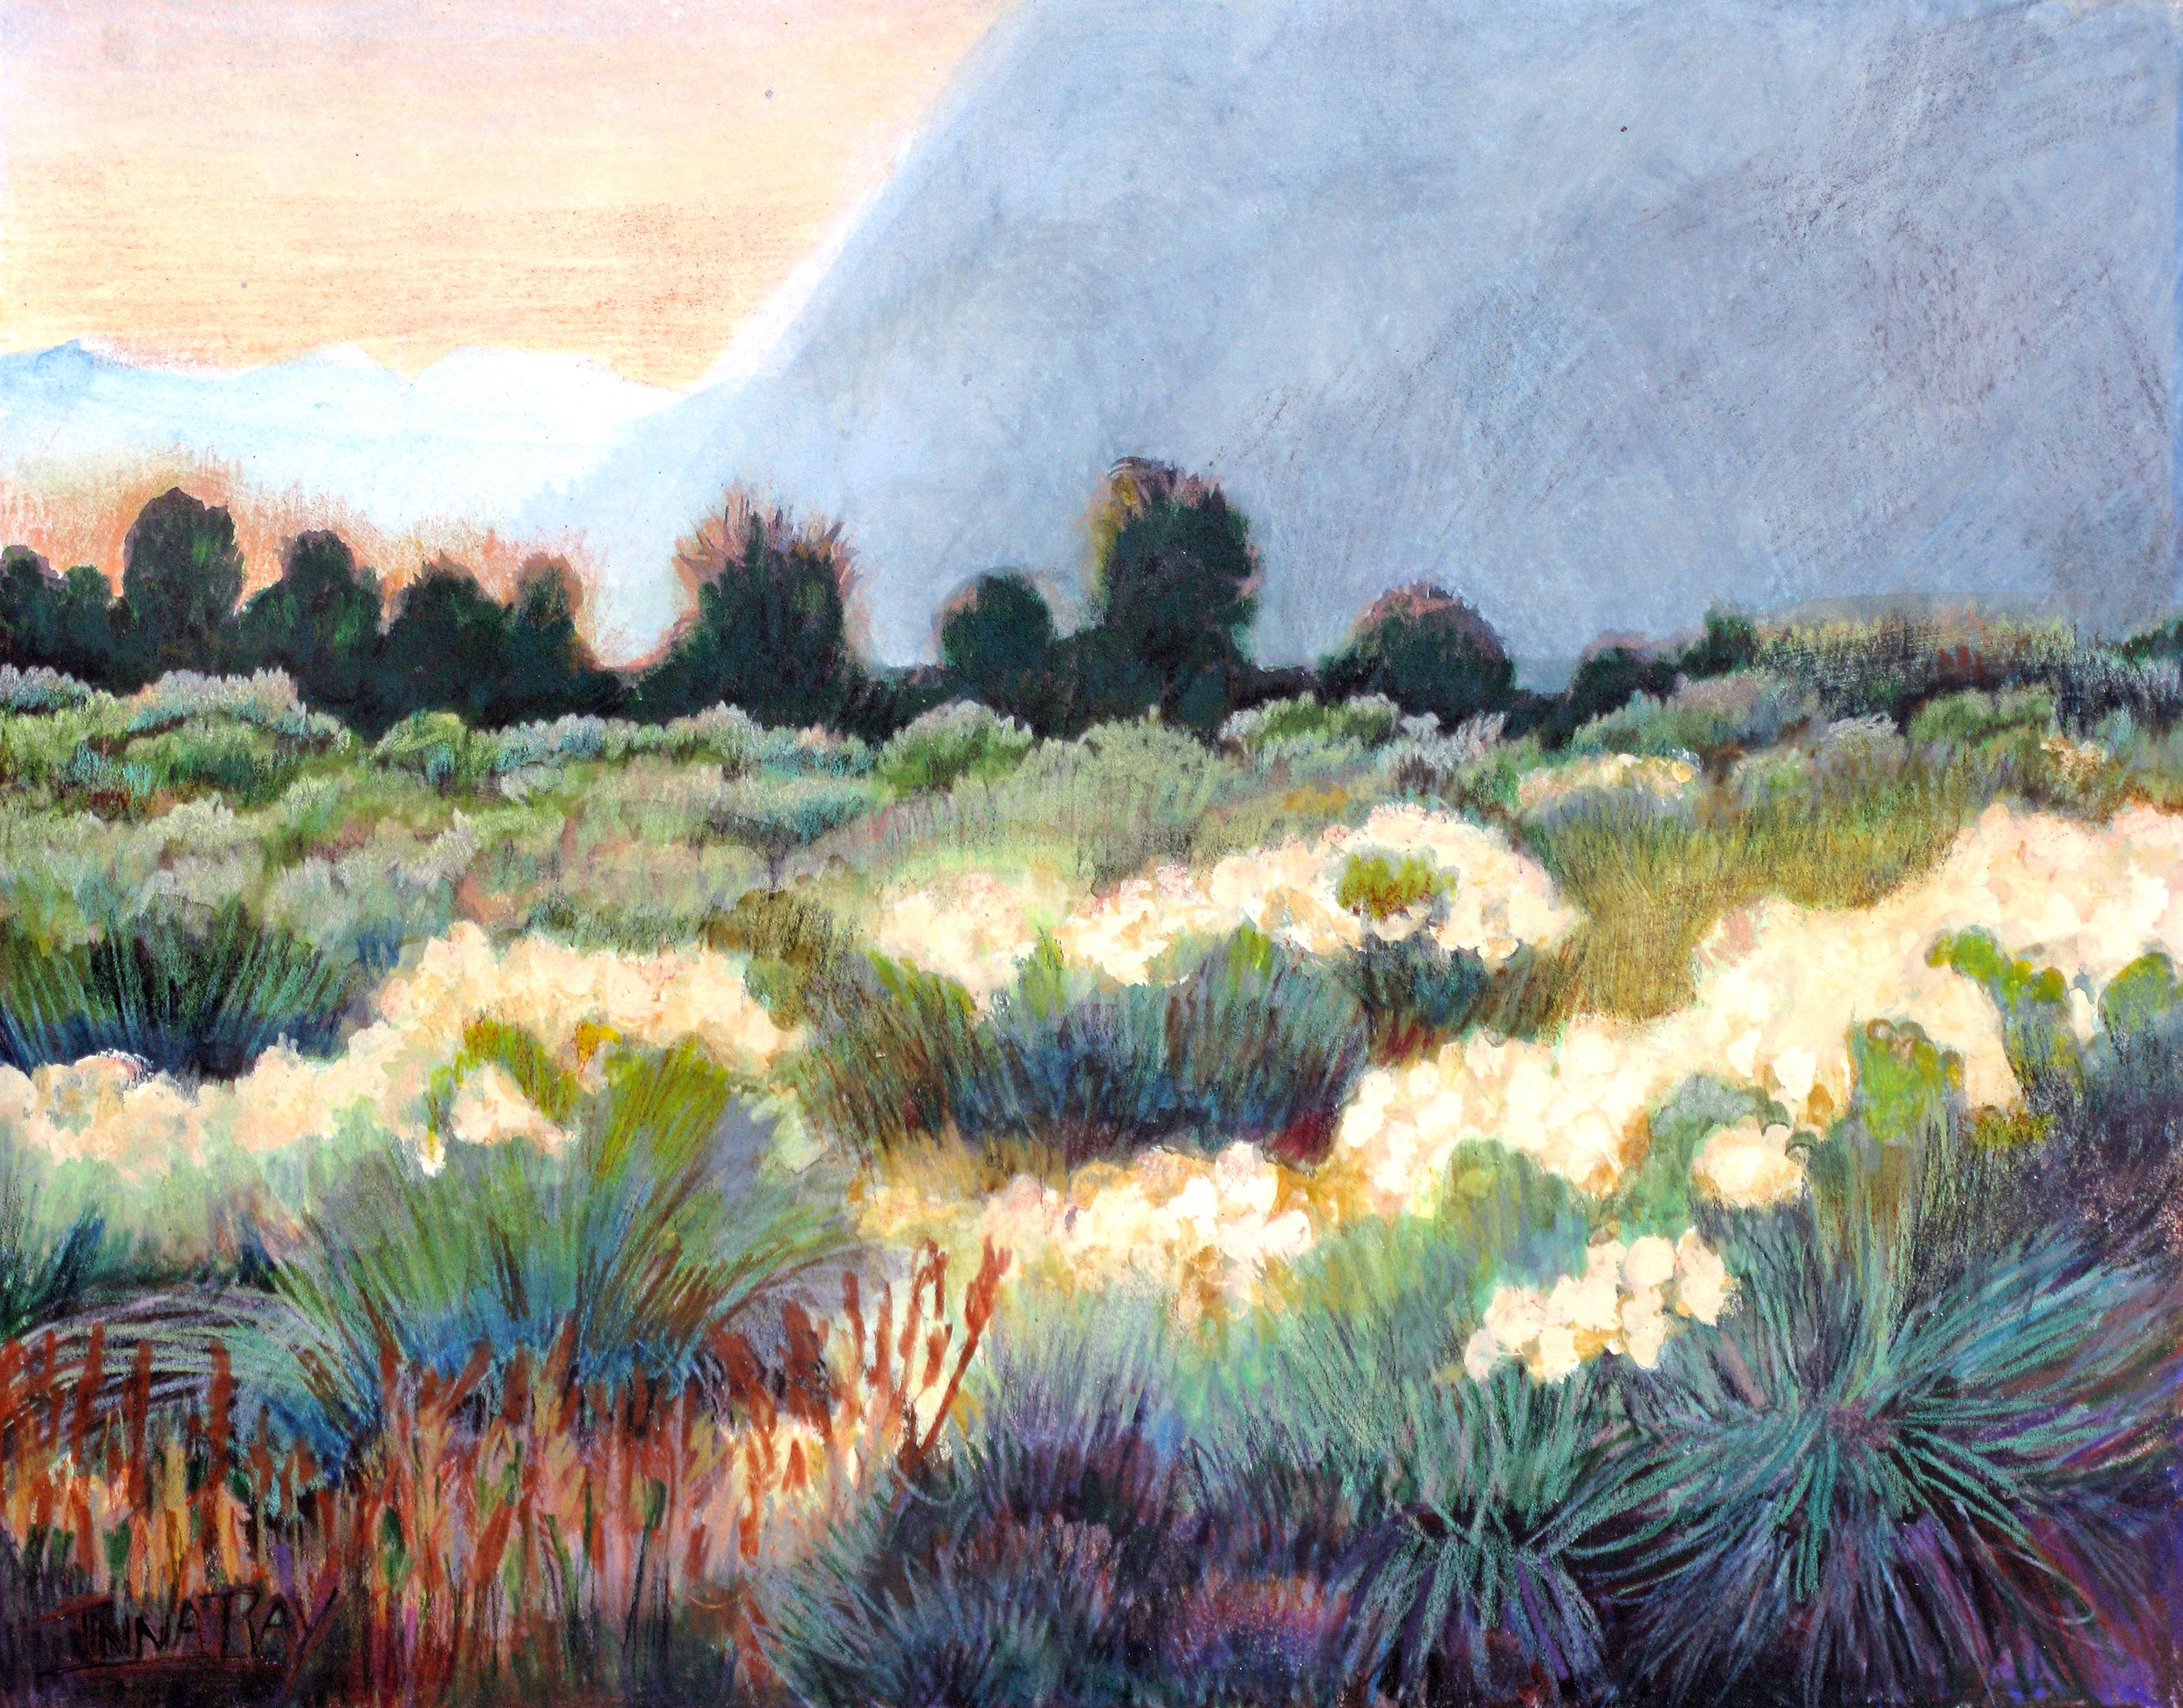 Rabbit Brush, Long Valley – 2012, Collection of the Escalette Permanent Collection of Art